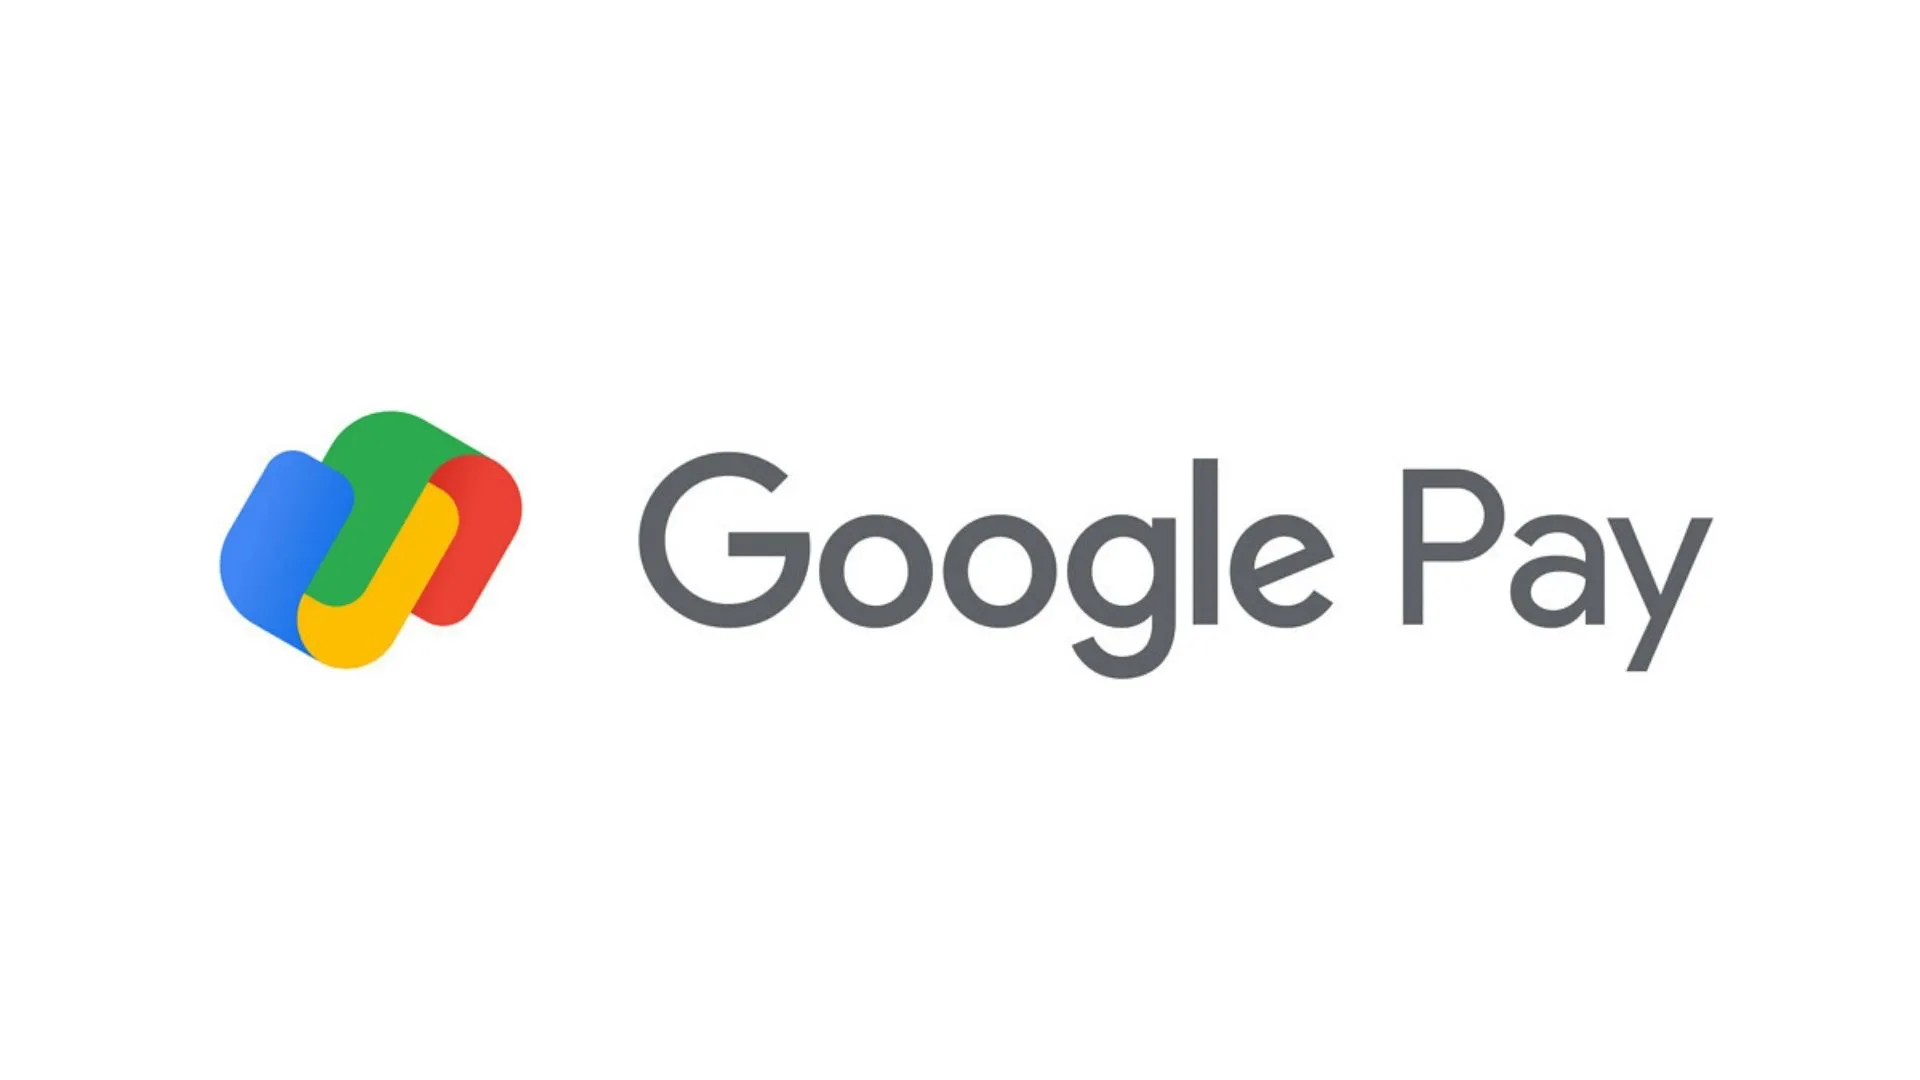 Official logo of Google Pay